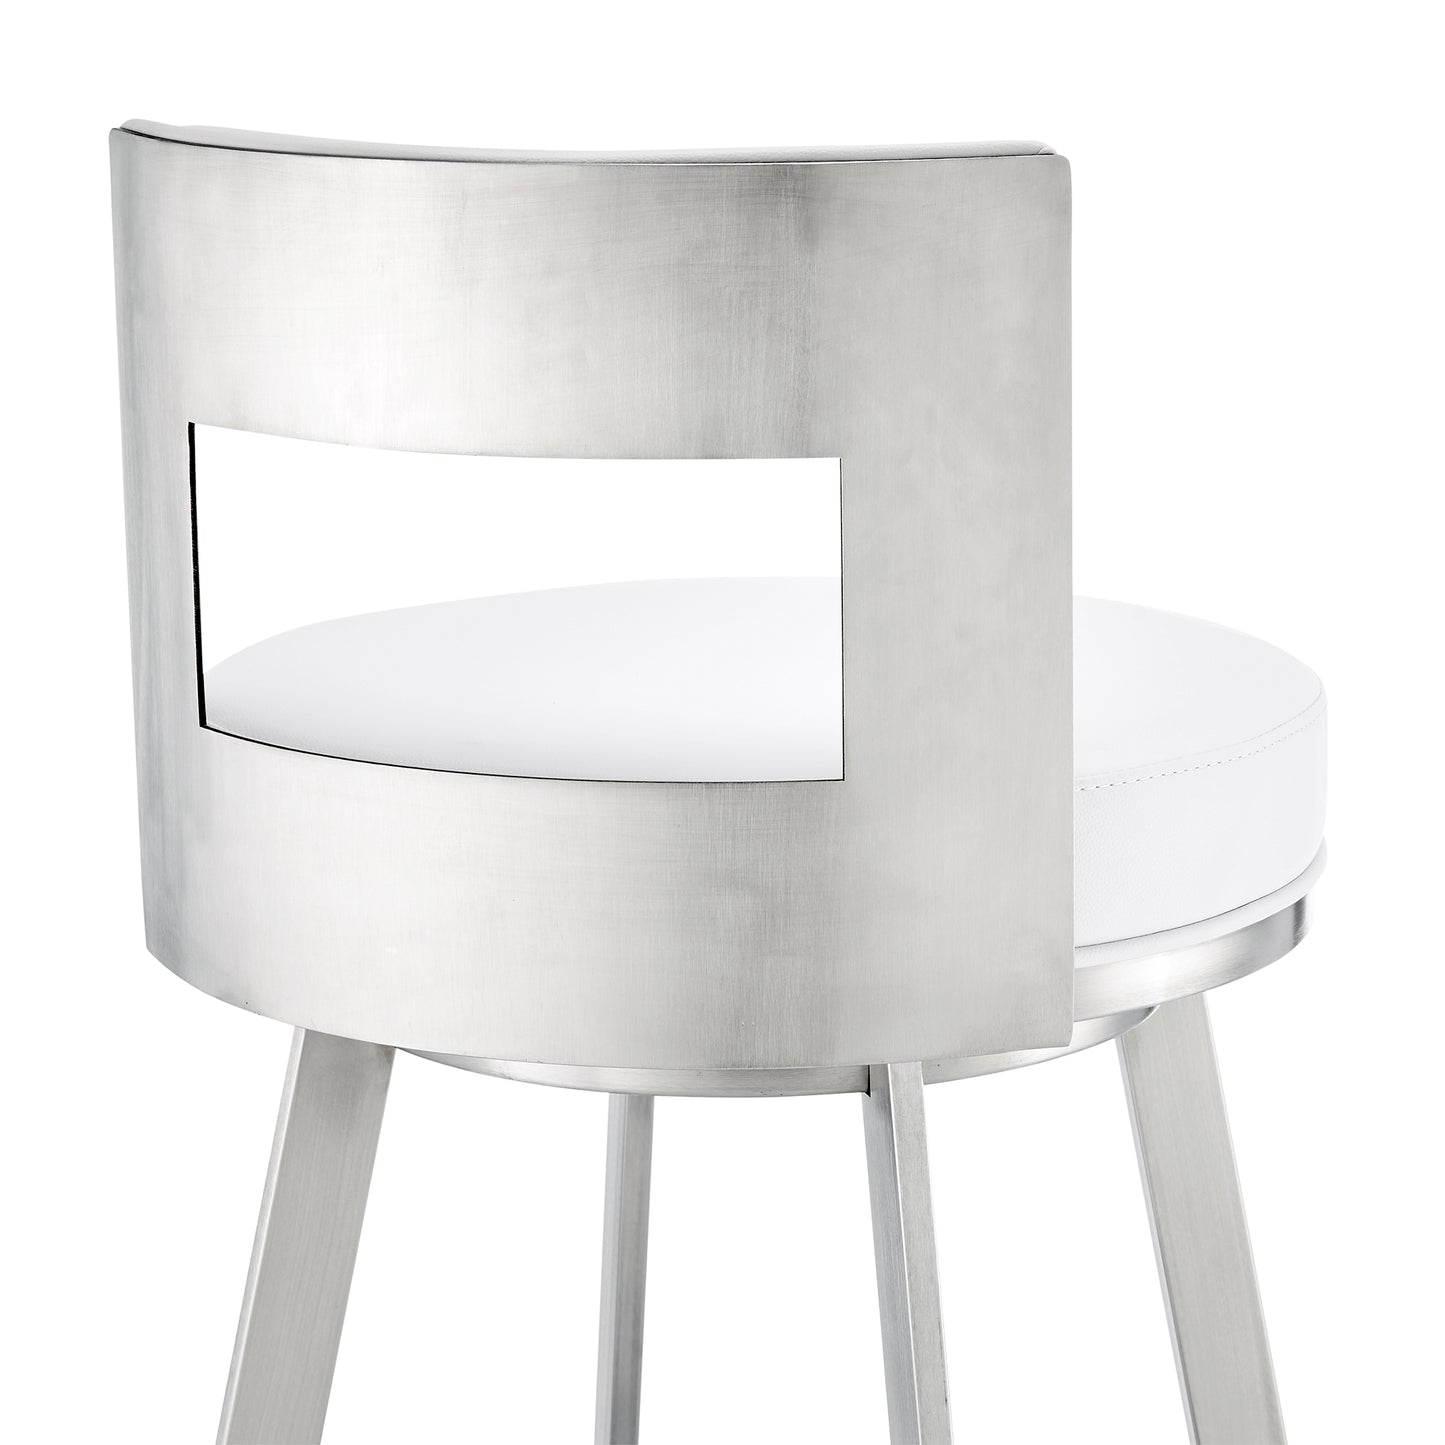 Flynn 26" Swivel Counter Stool in Brushed Stainless Steel with White Faux Leather